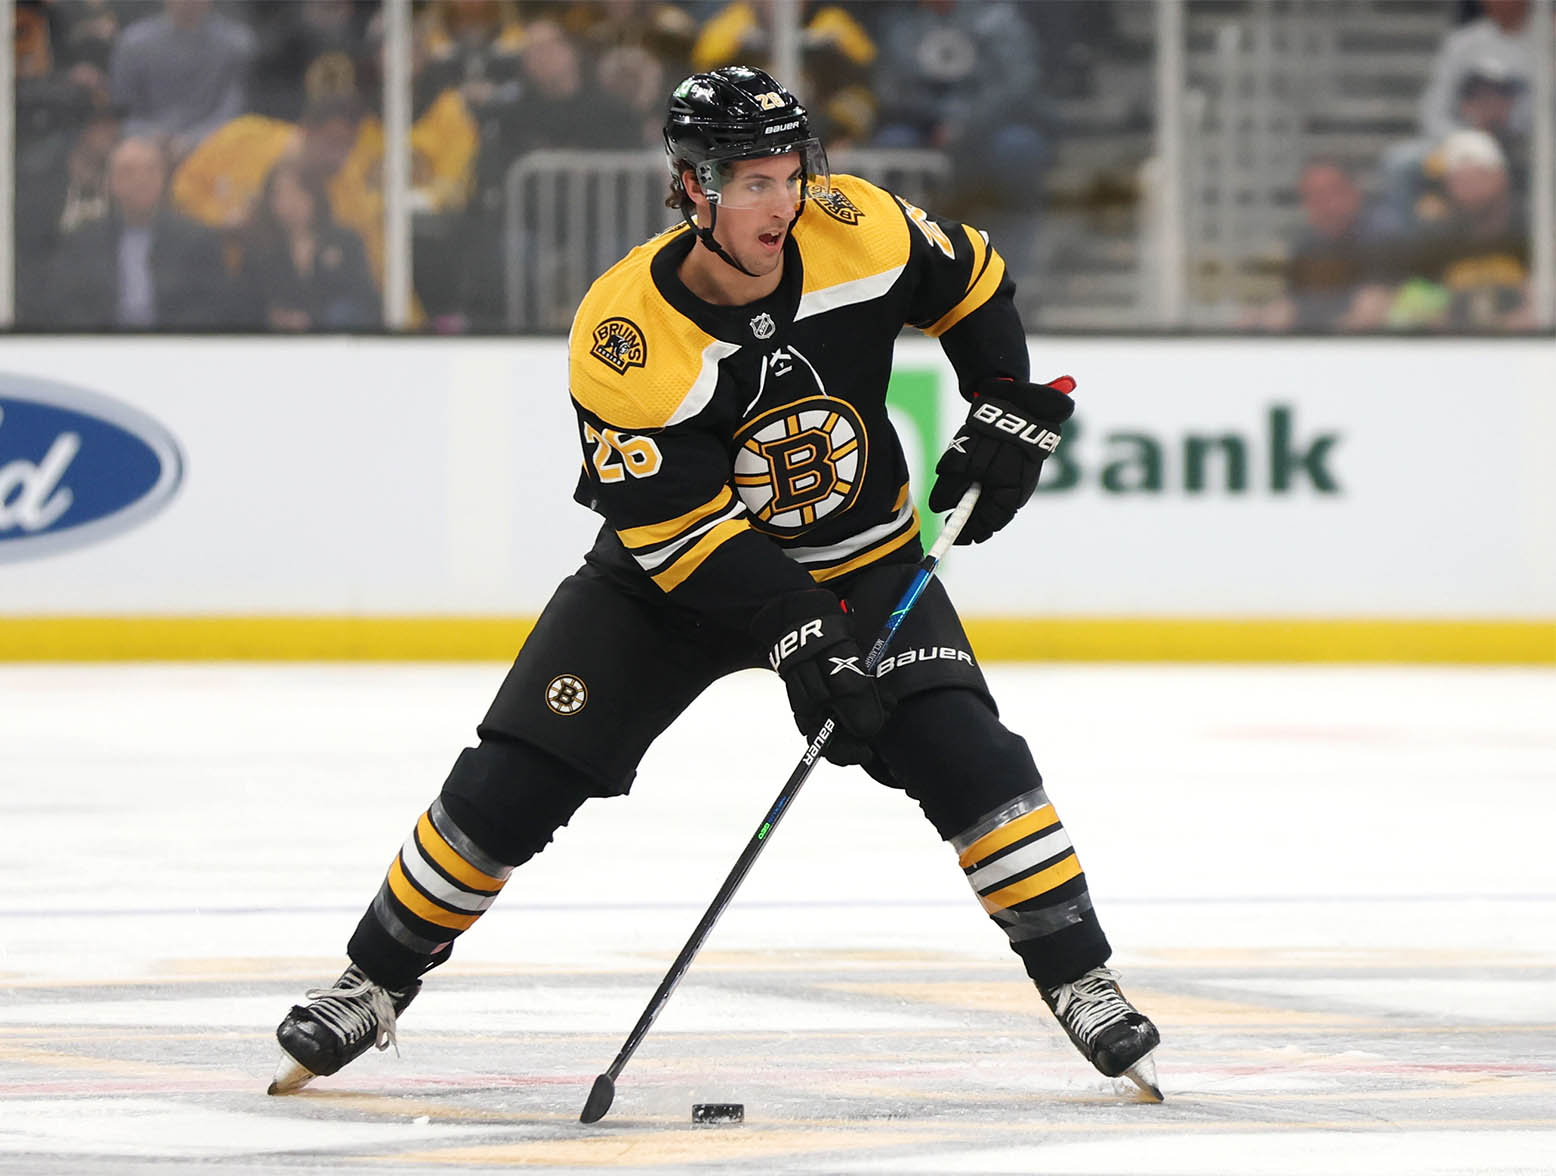 BOSTON, MASSACHUSETTS - APRIL 12: Marc McLaughlin #26 of the Boston Bruins skates against the St. Louis Blues during the first period at TD Garden on April 12, 2022 in Boston, Massachusetts. (Photo by Maddie Meyer/Getty Images)